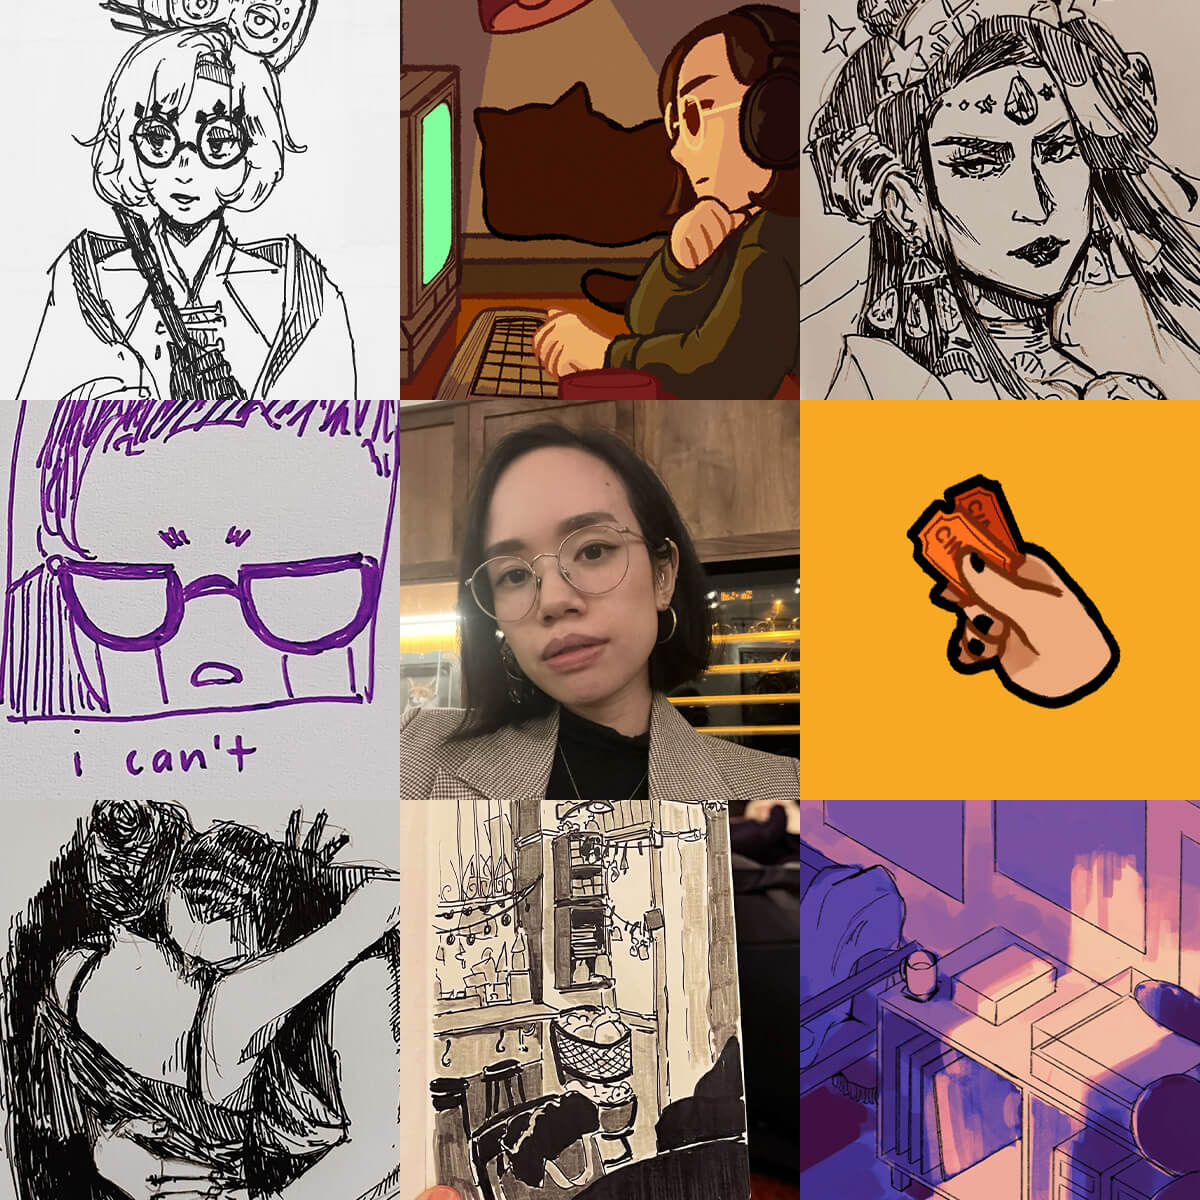 Three by three grid, showing thumbnails of 8 pieces of artwork—mostly sketches—and a selfie of myself.